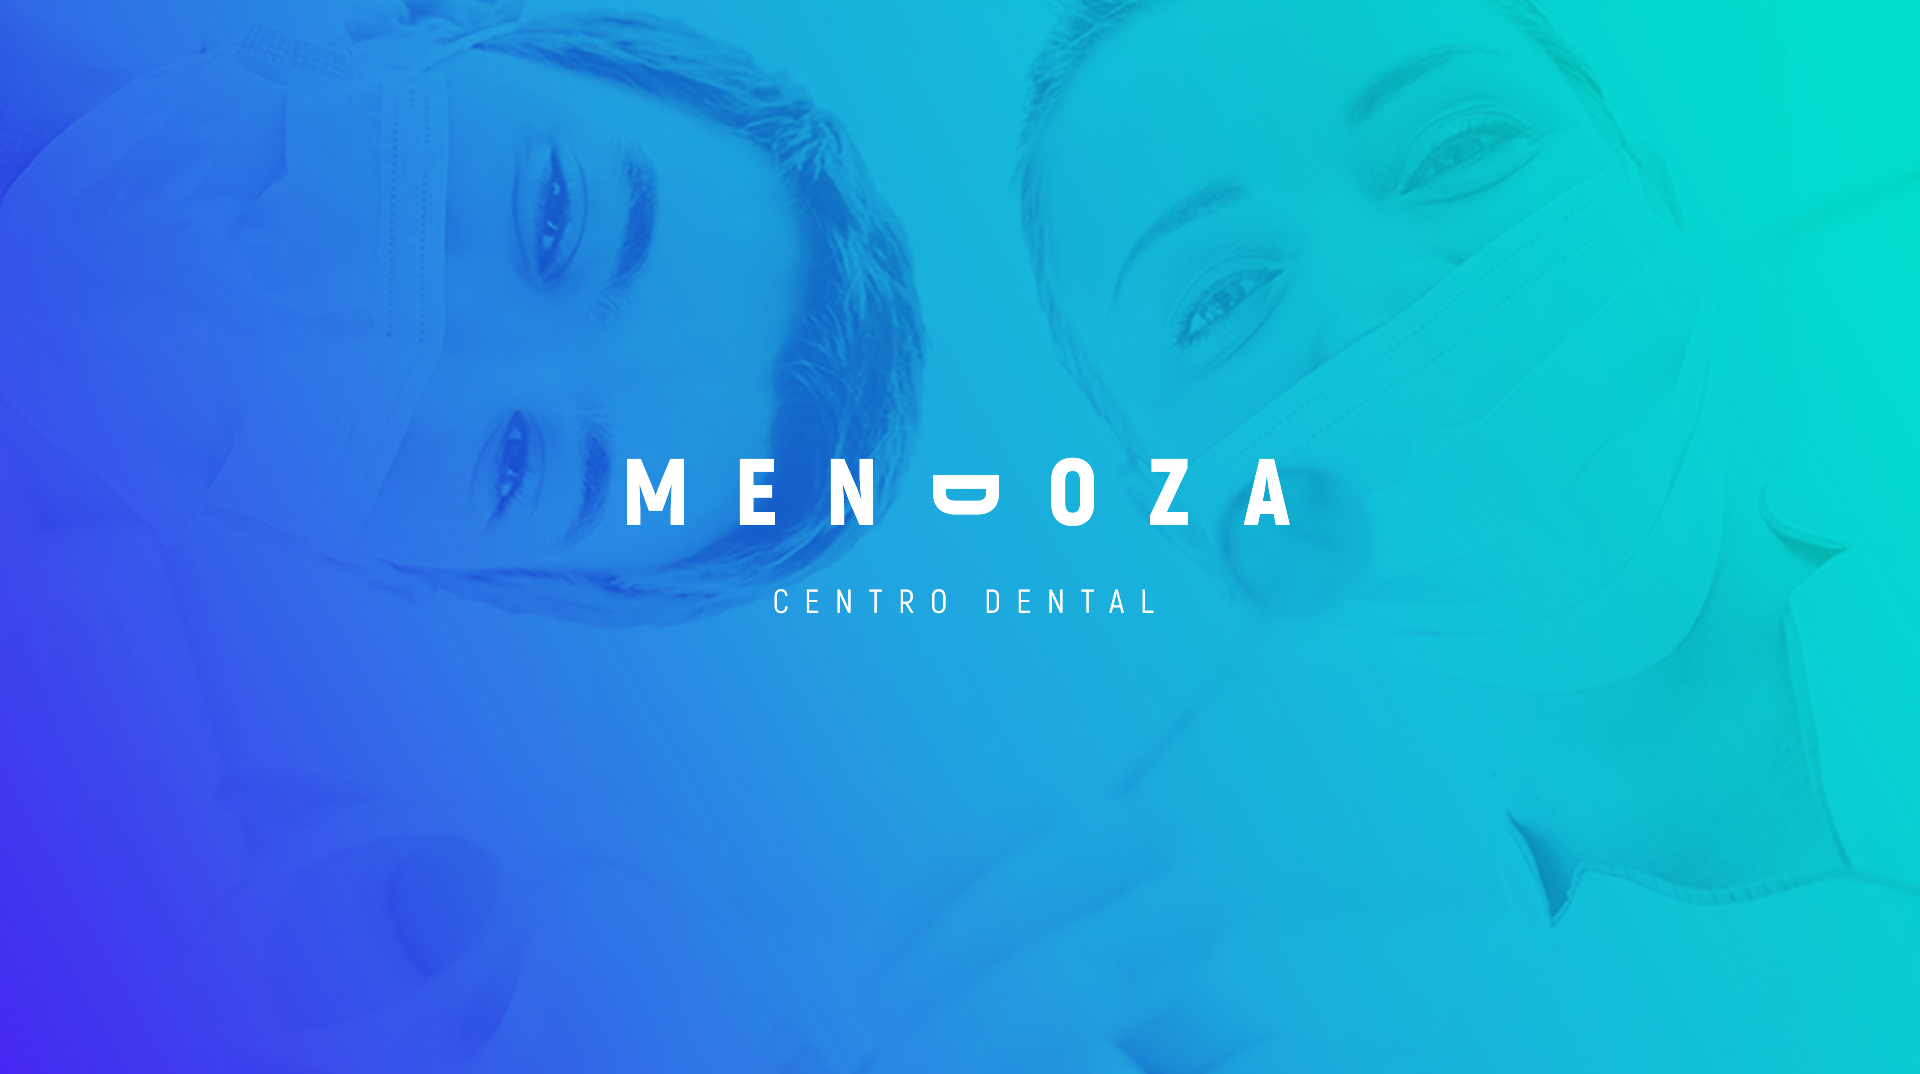 Centro Dental Mendoza by Chillypills - Creative Work